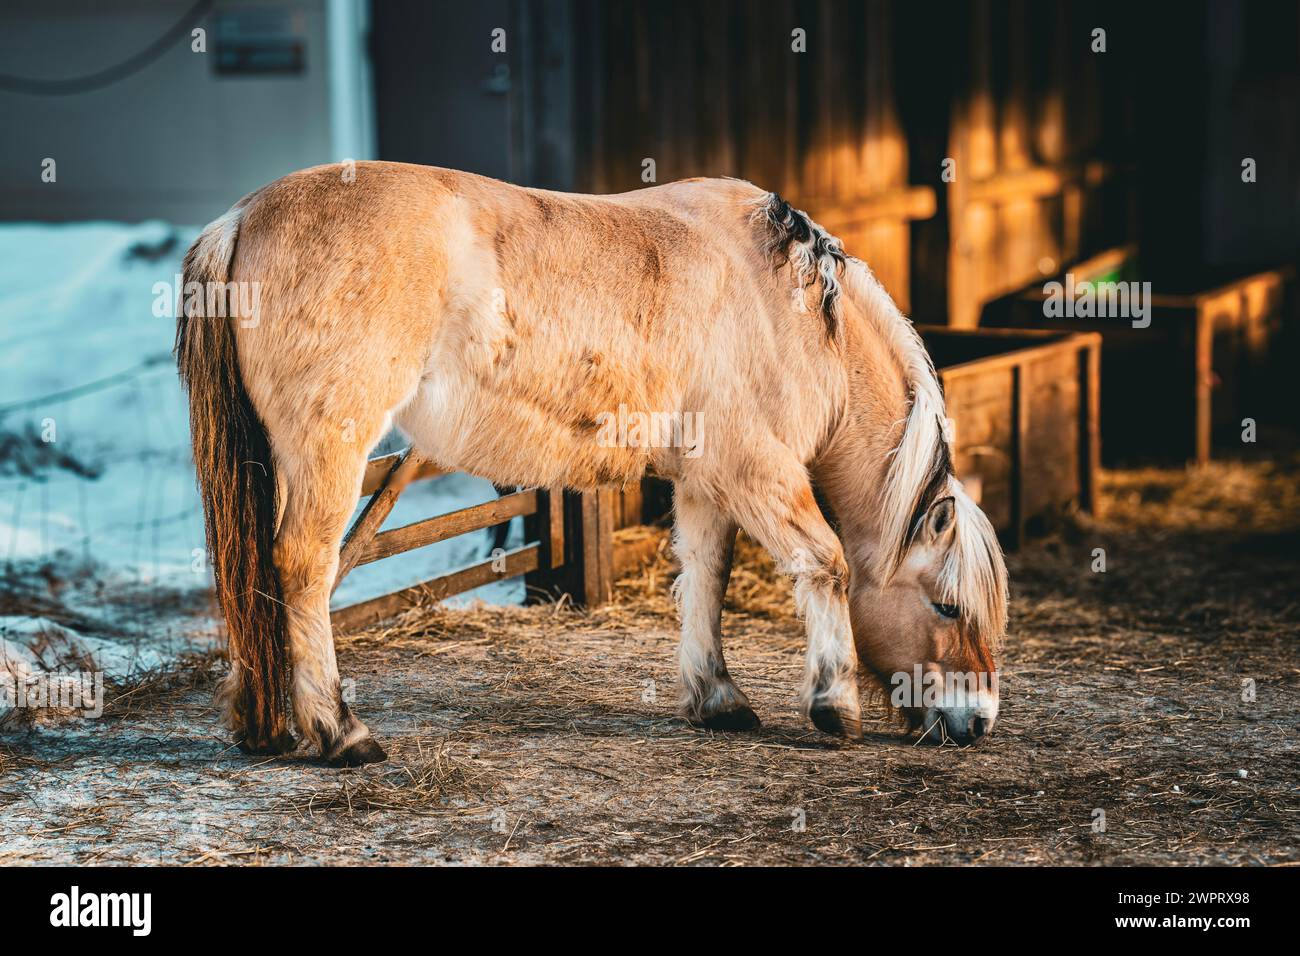 Stunning horse in the cold winter season in Finland Stock Photo